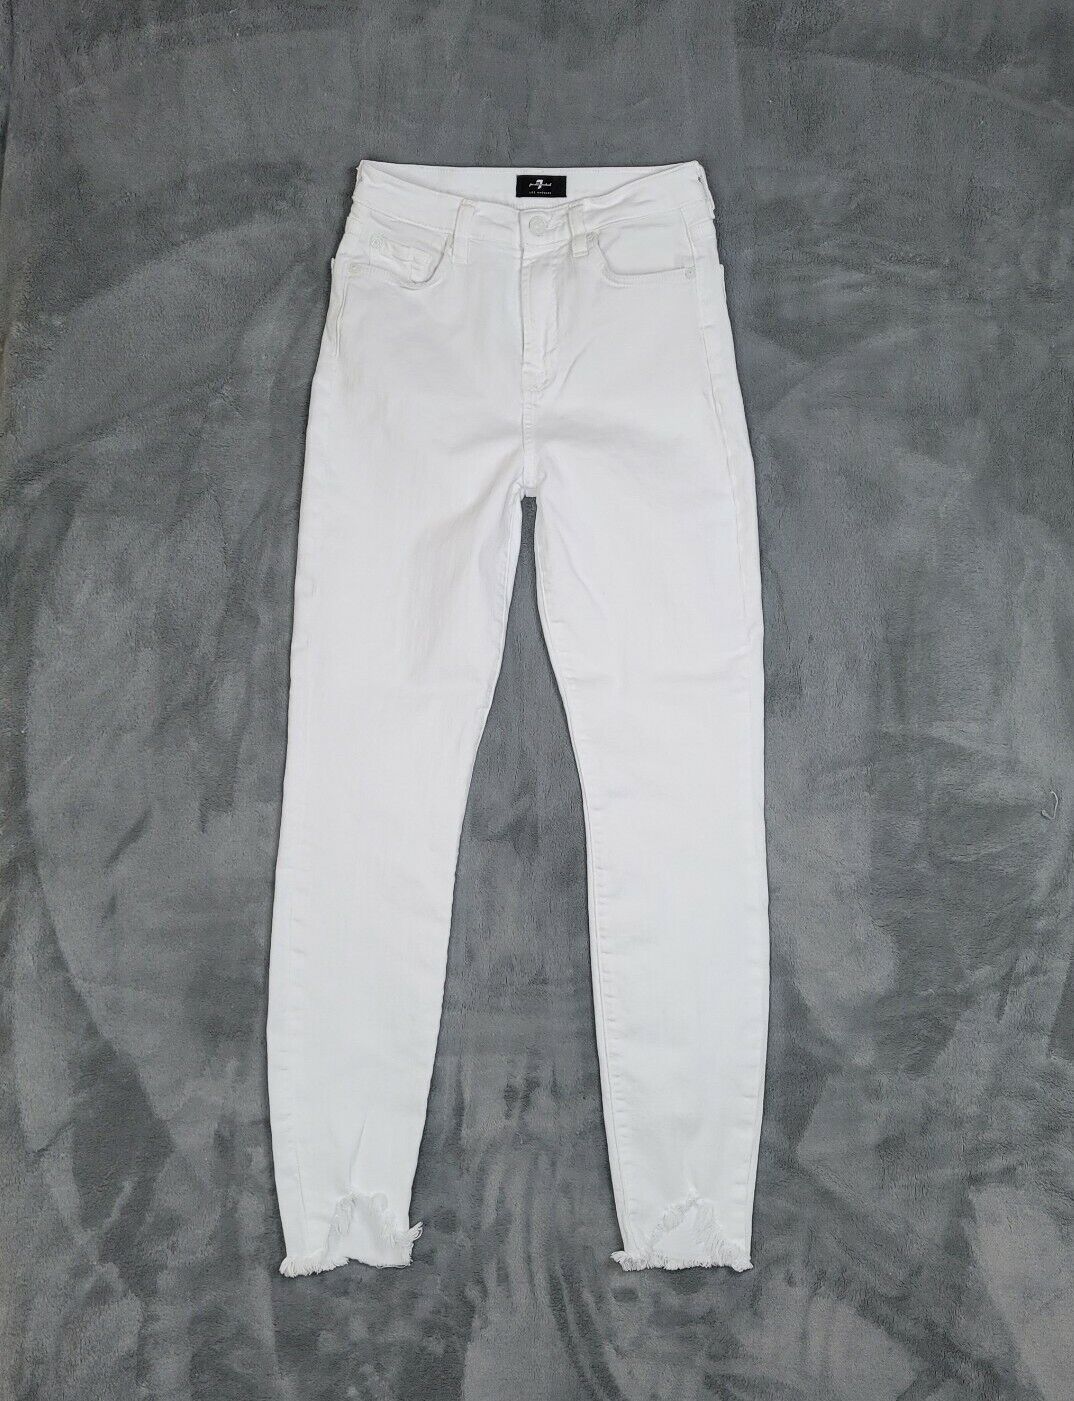 Jeans Womens Sz 26 The High Waste Ankle Skinny 7 For All Mankind White Raw Hem